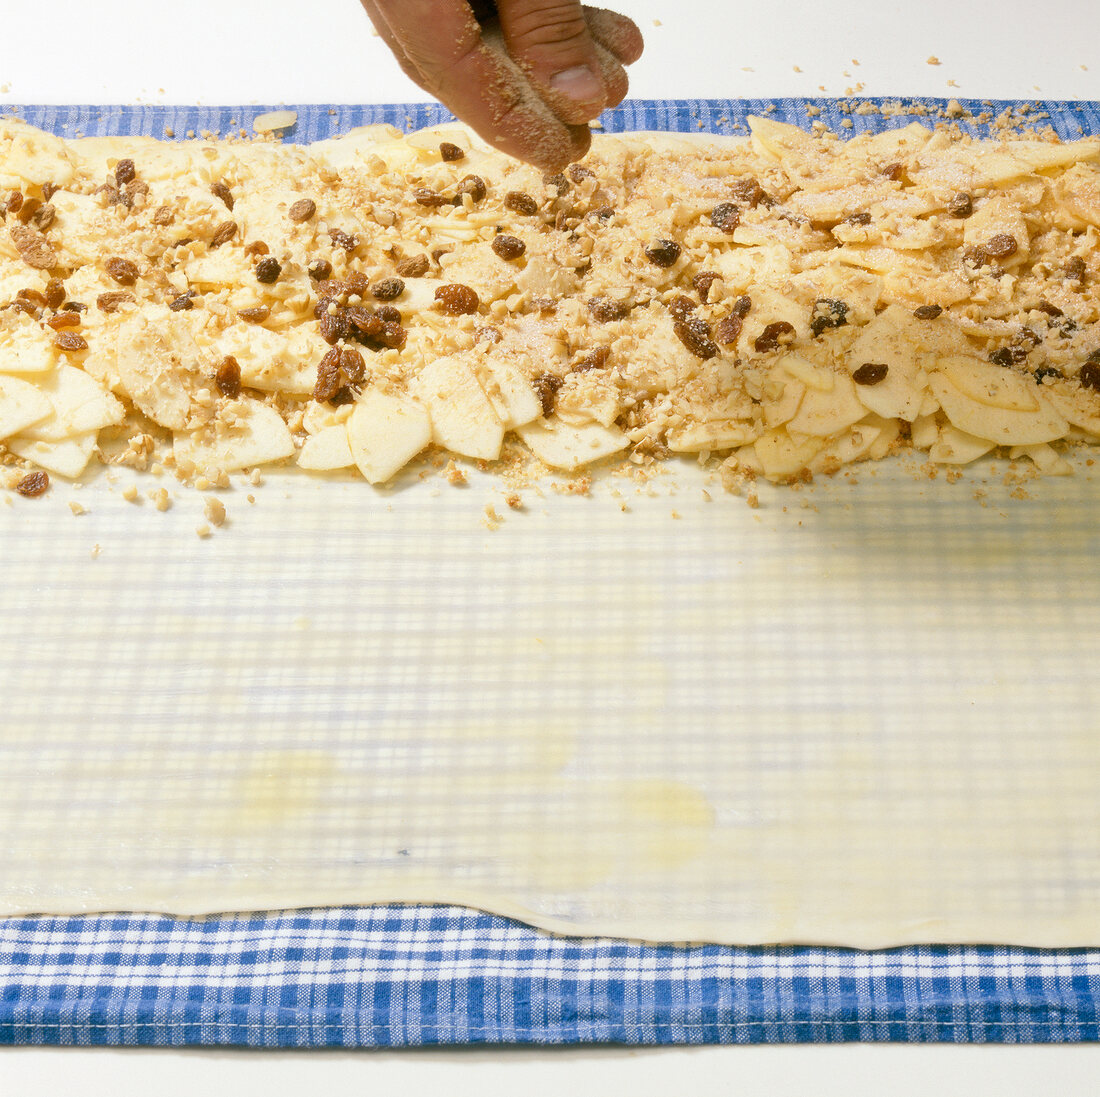 Toasted breadcrumbs and nuts topped on greased dough sheet for preparing strudel